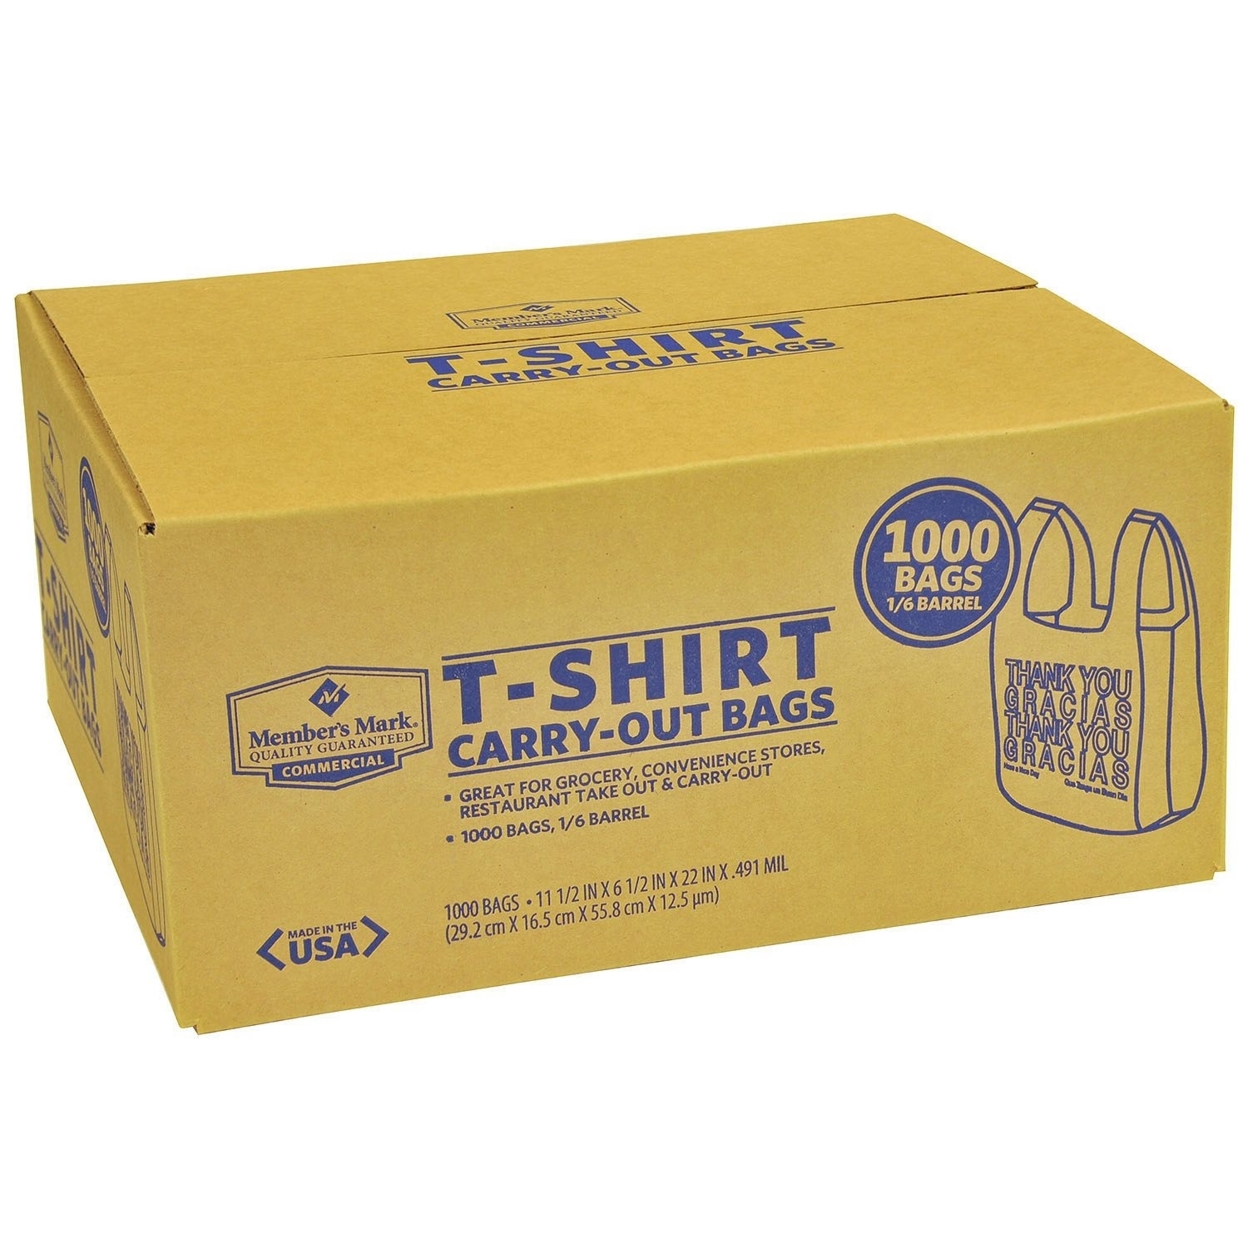 Member's Mark T-Shirt Carry-Out Bags (1,000 Count)